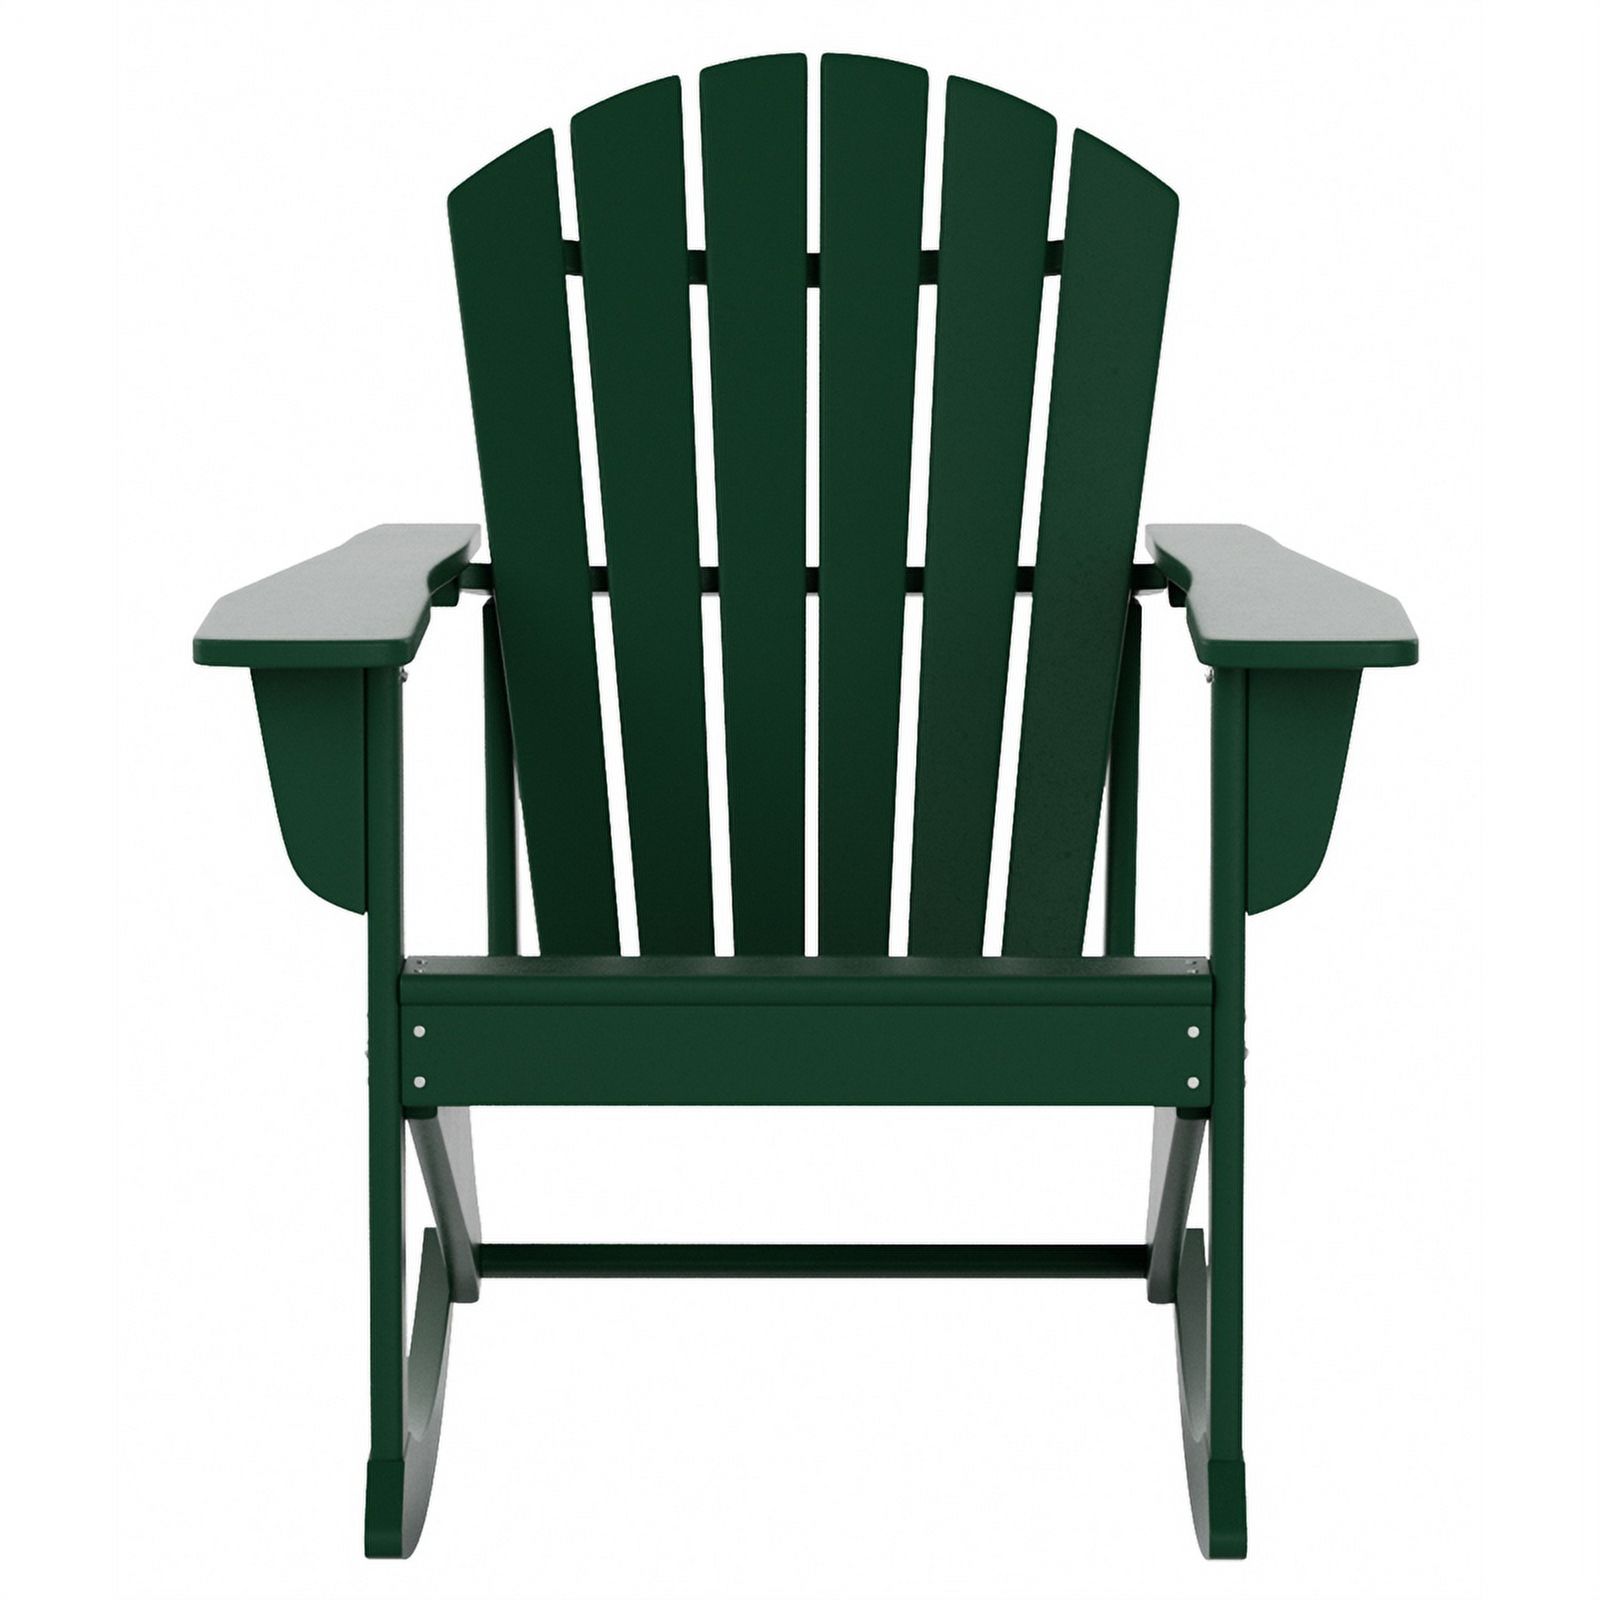 Portside Outdoor Poly Plastic Adirondack Rocking Chair - image 3 of 7